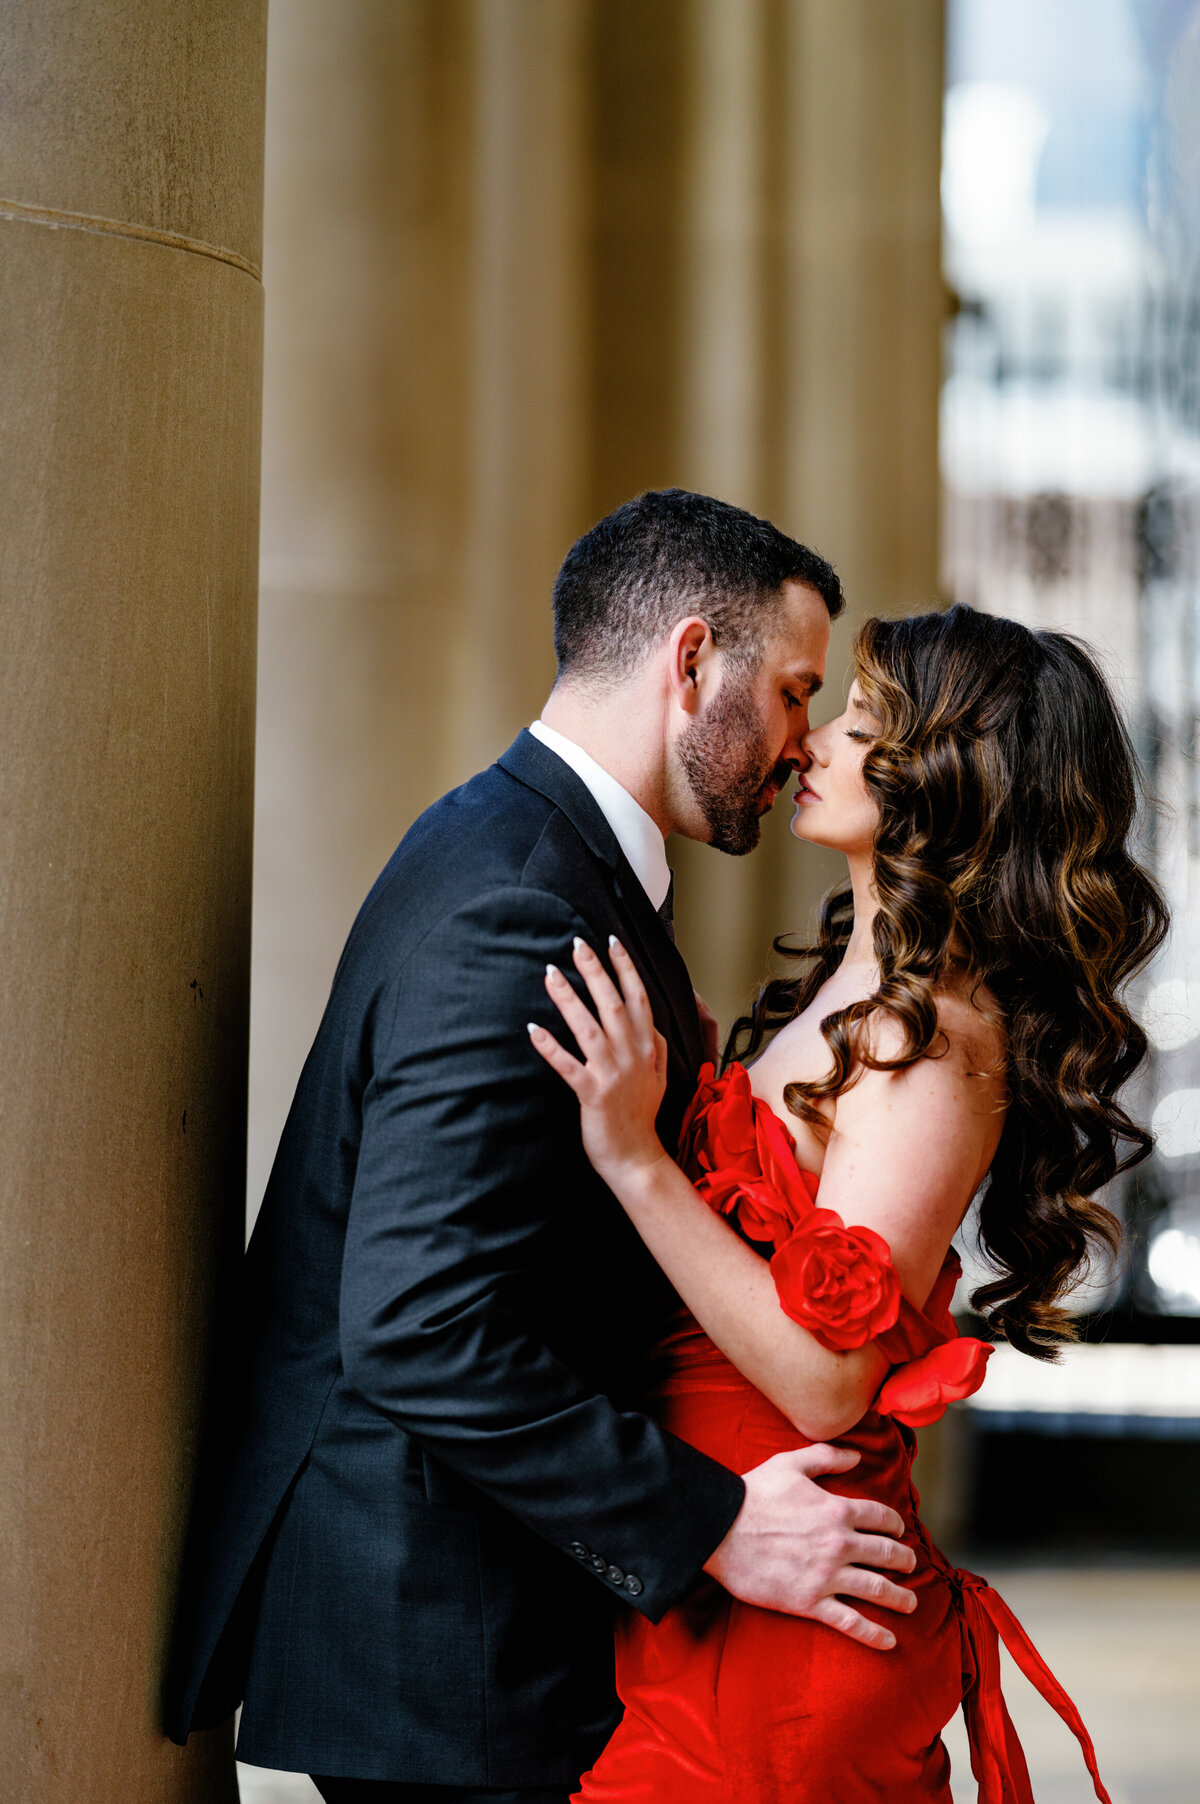 Aspen-Avenue-Chicago-Wedding-Photographer-Union-Station-Chicago-Theater-Engagement-Session-Timeless-Romantic-Red-Dress-Editorial-Stemming-From-Love-Bry-Jean-Artistry-The-Bridal-Collective-True-to-color-Luxury-FAV-59